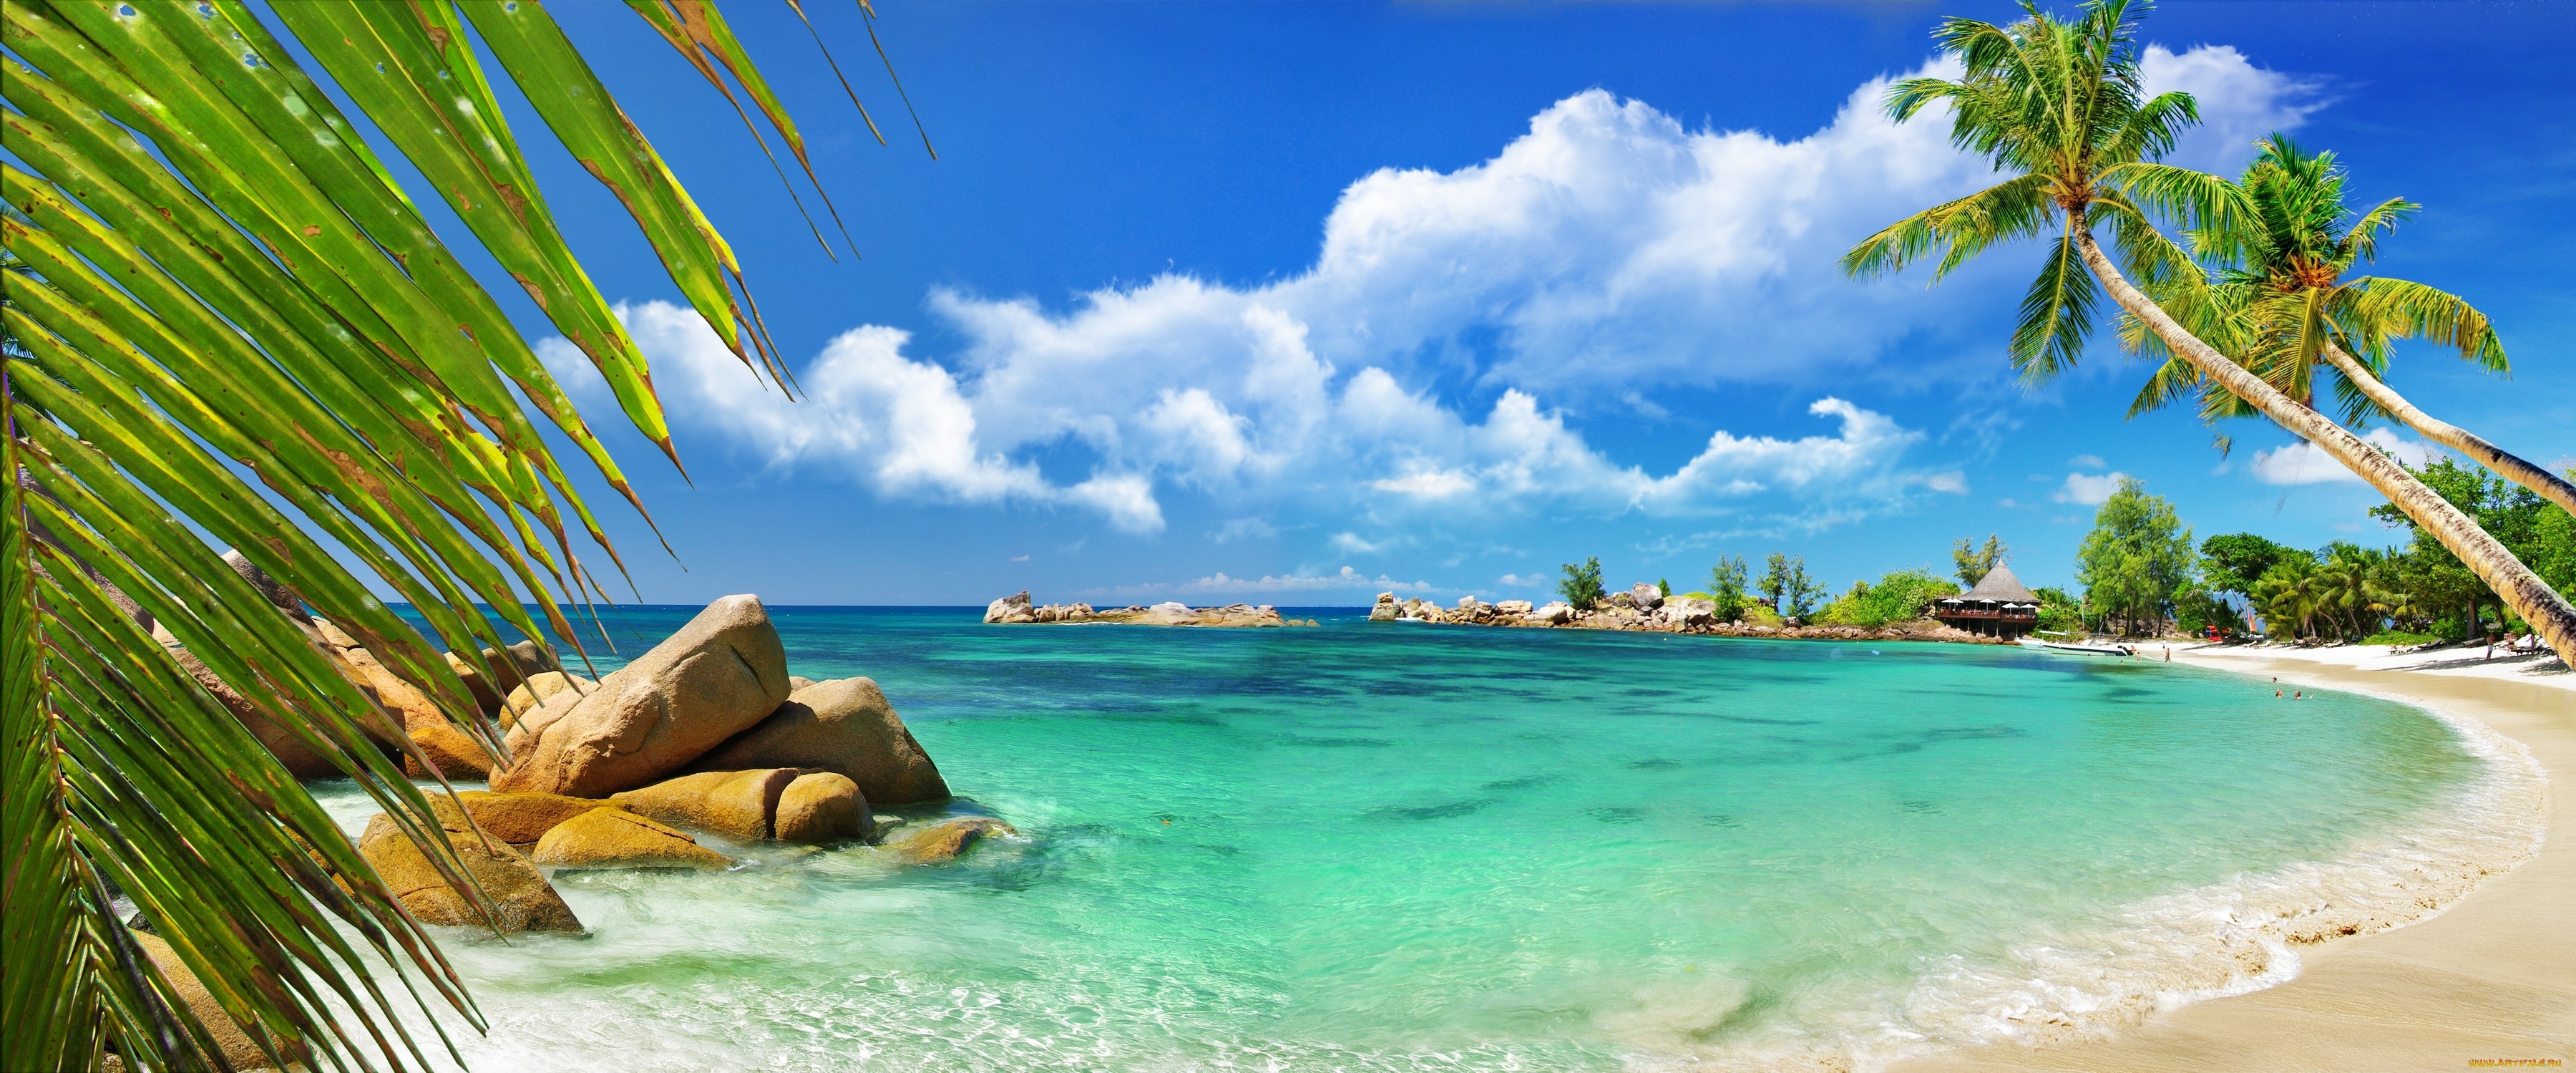 General 3600x1499 landscape palm trees beach water sky tropical